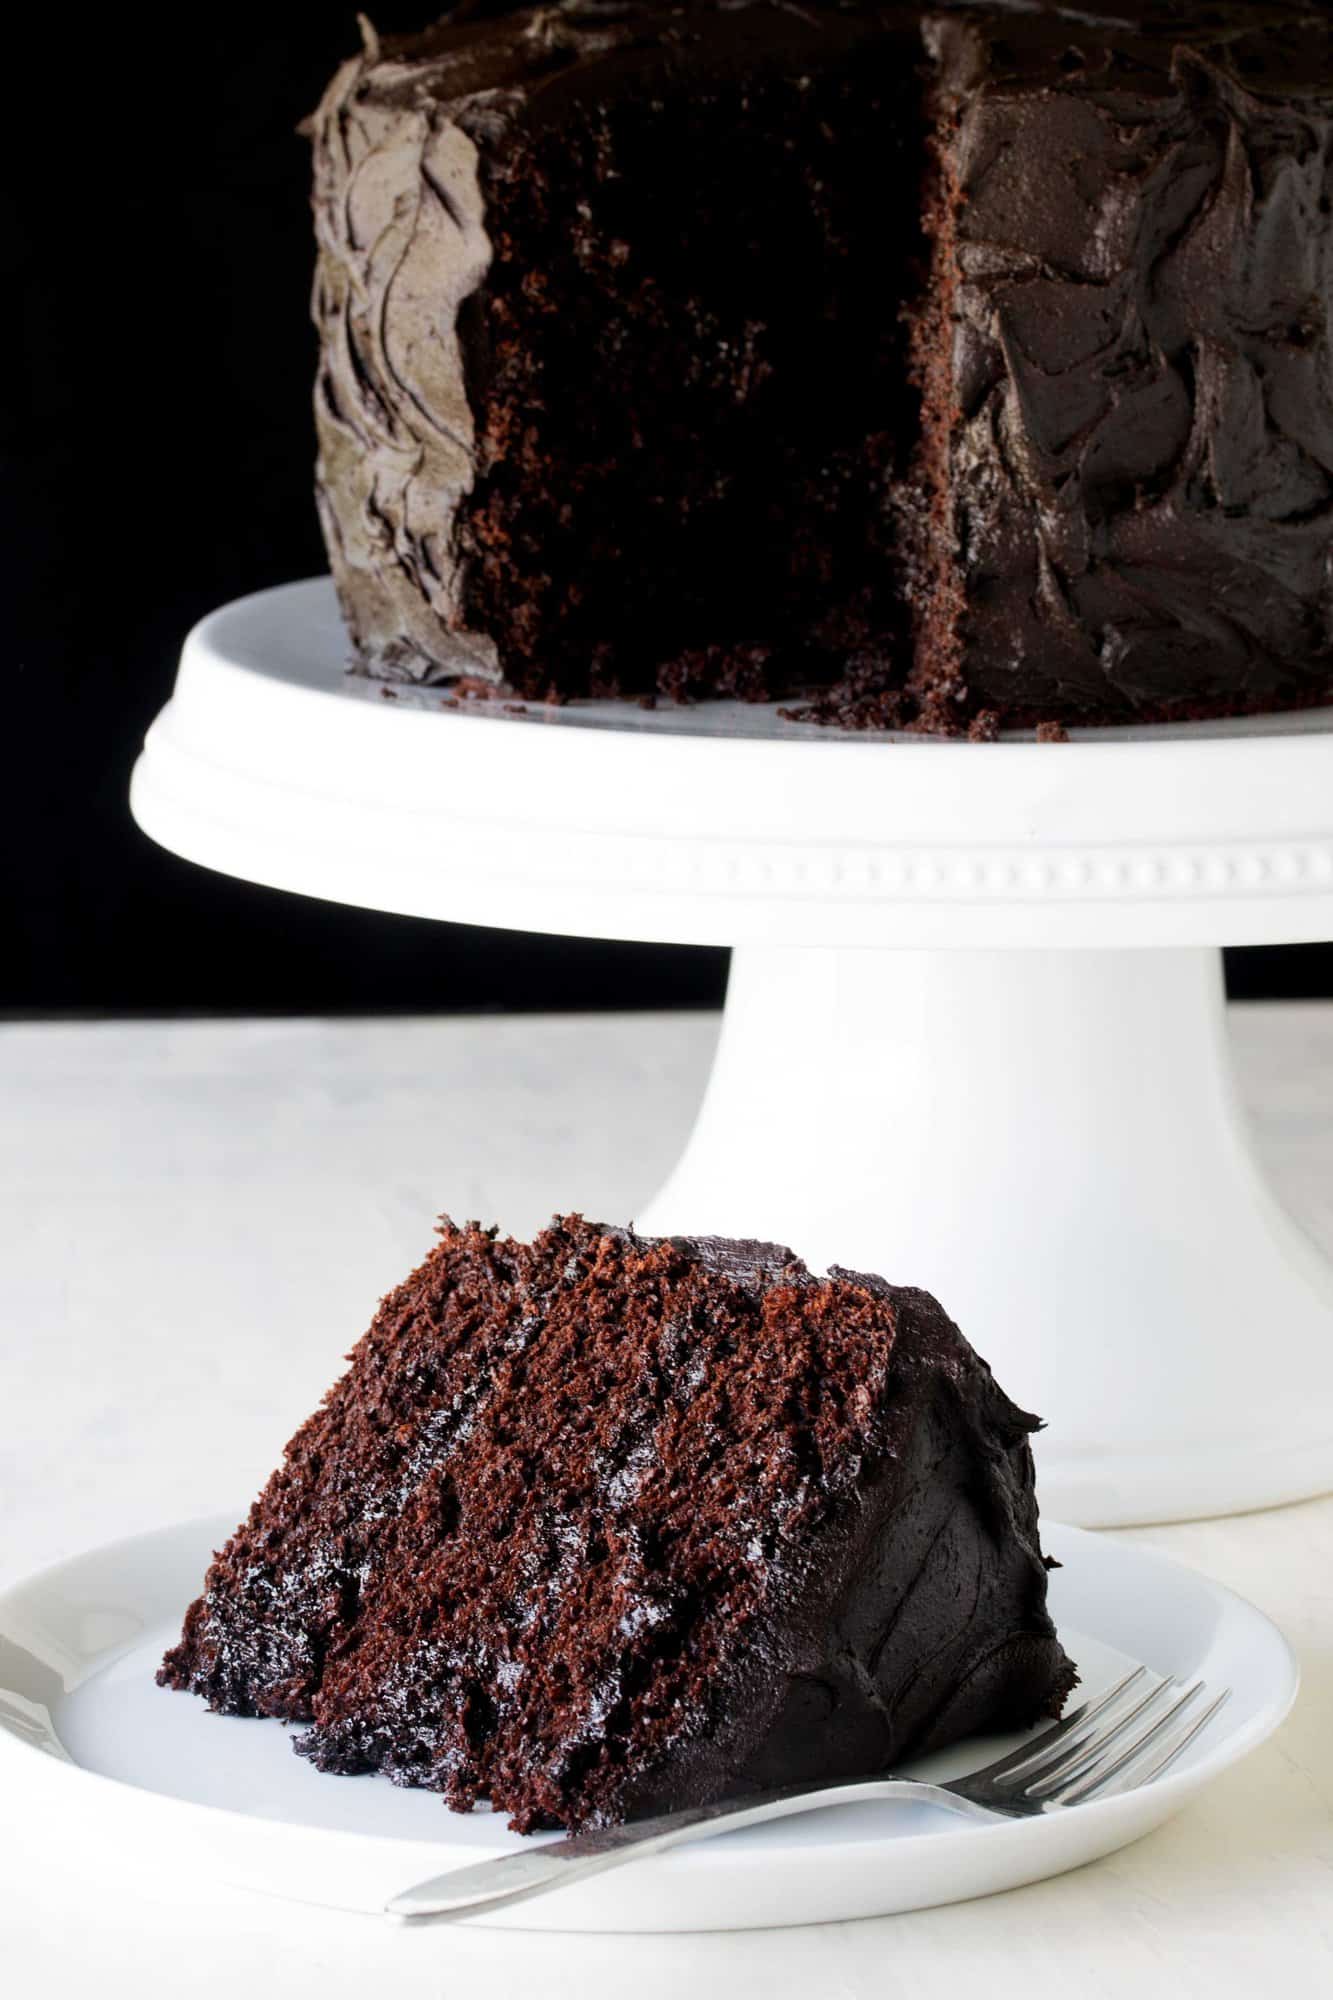 The Most Amazing Chocolate Cake is here. I call this my Matilda Cake because I swear it's just as good as the cake that Bruce Bogtrotter ate in Matilda. Moist, chocolaty perfection. This is the chocolate cake you've been dreaming of!